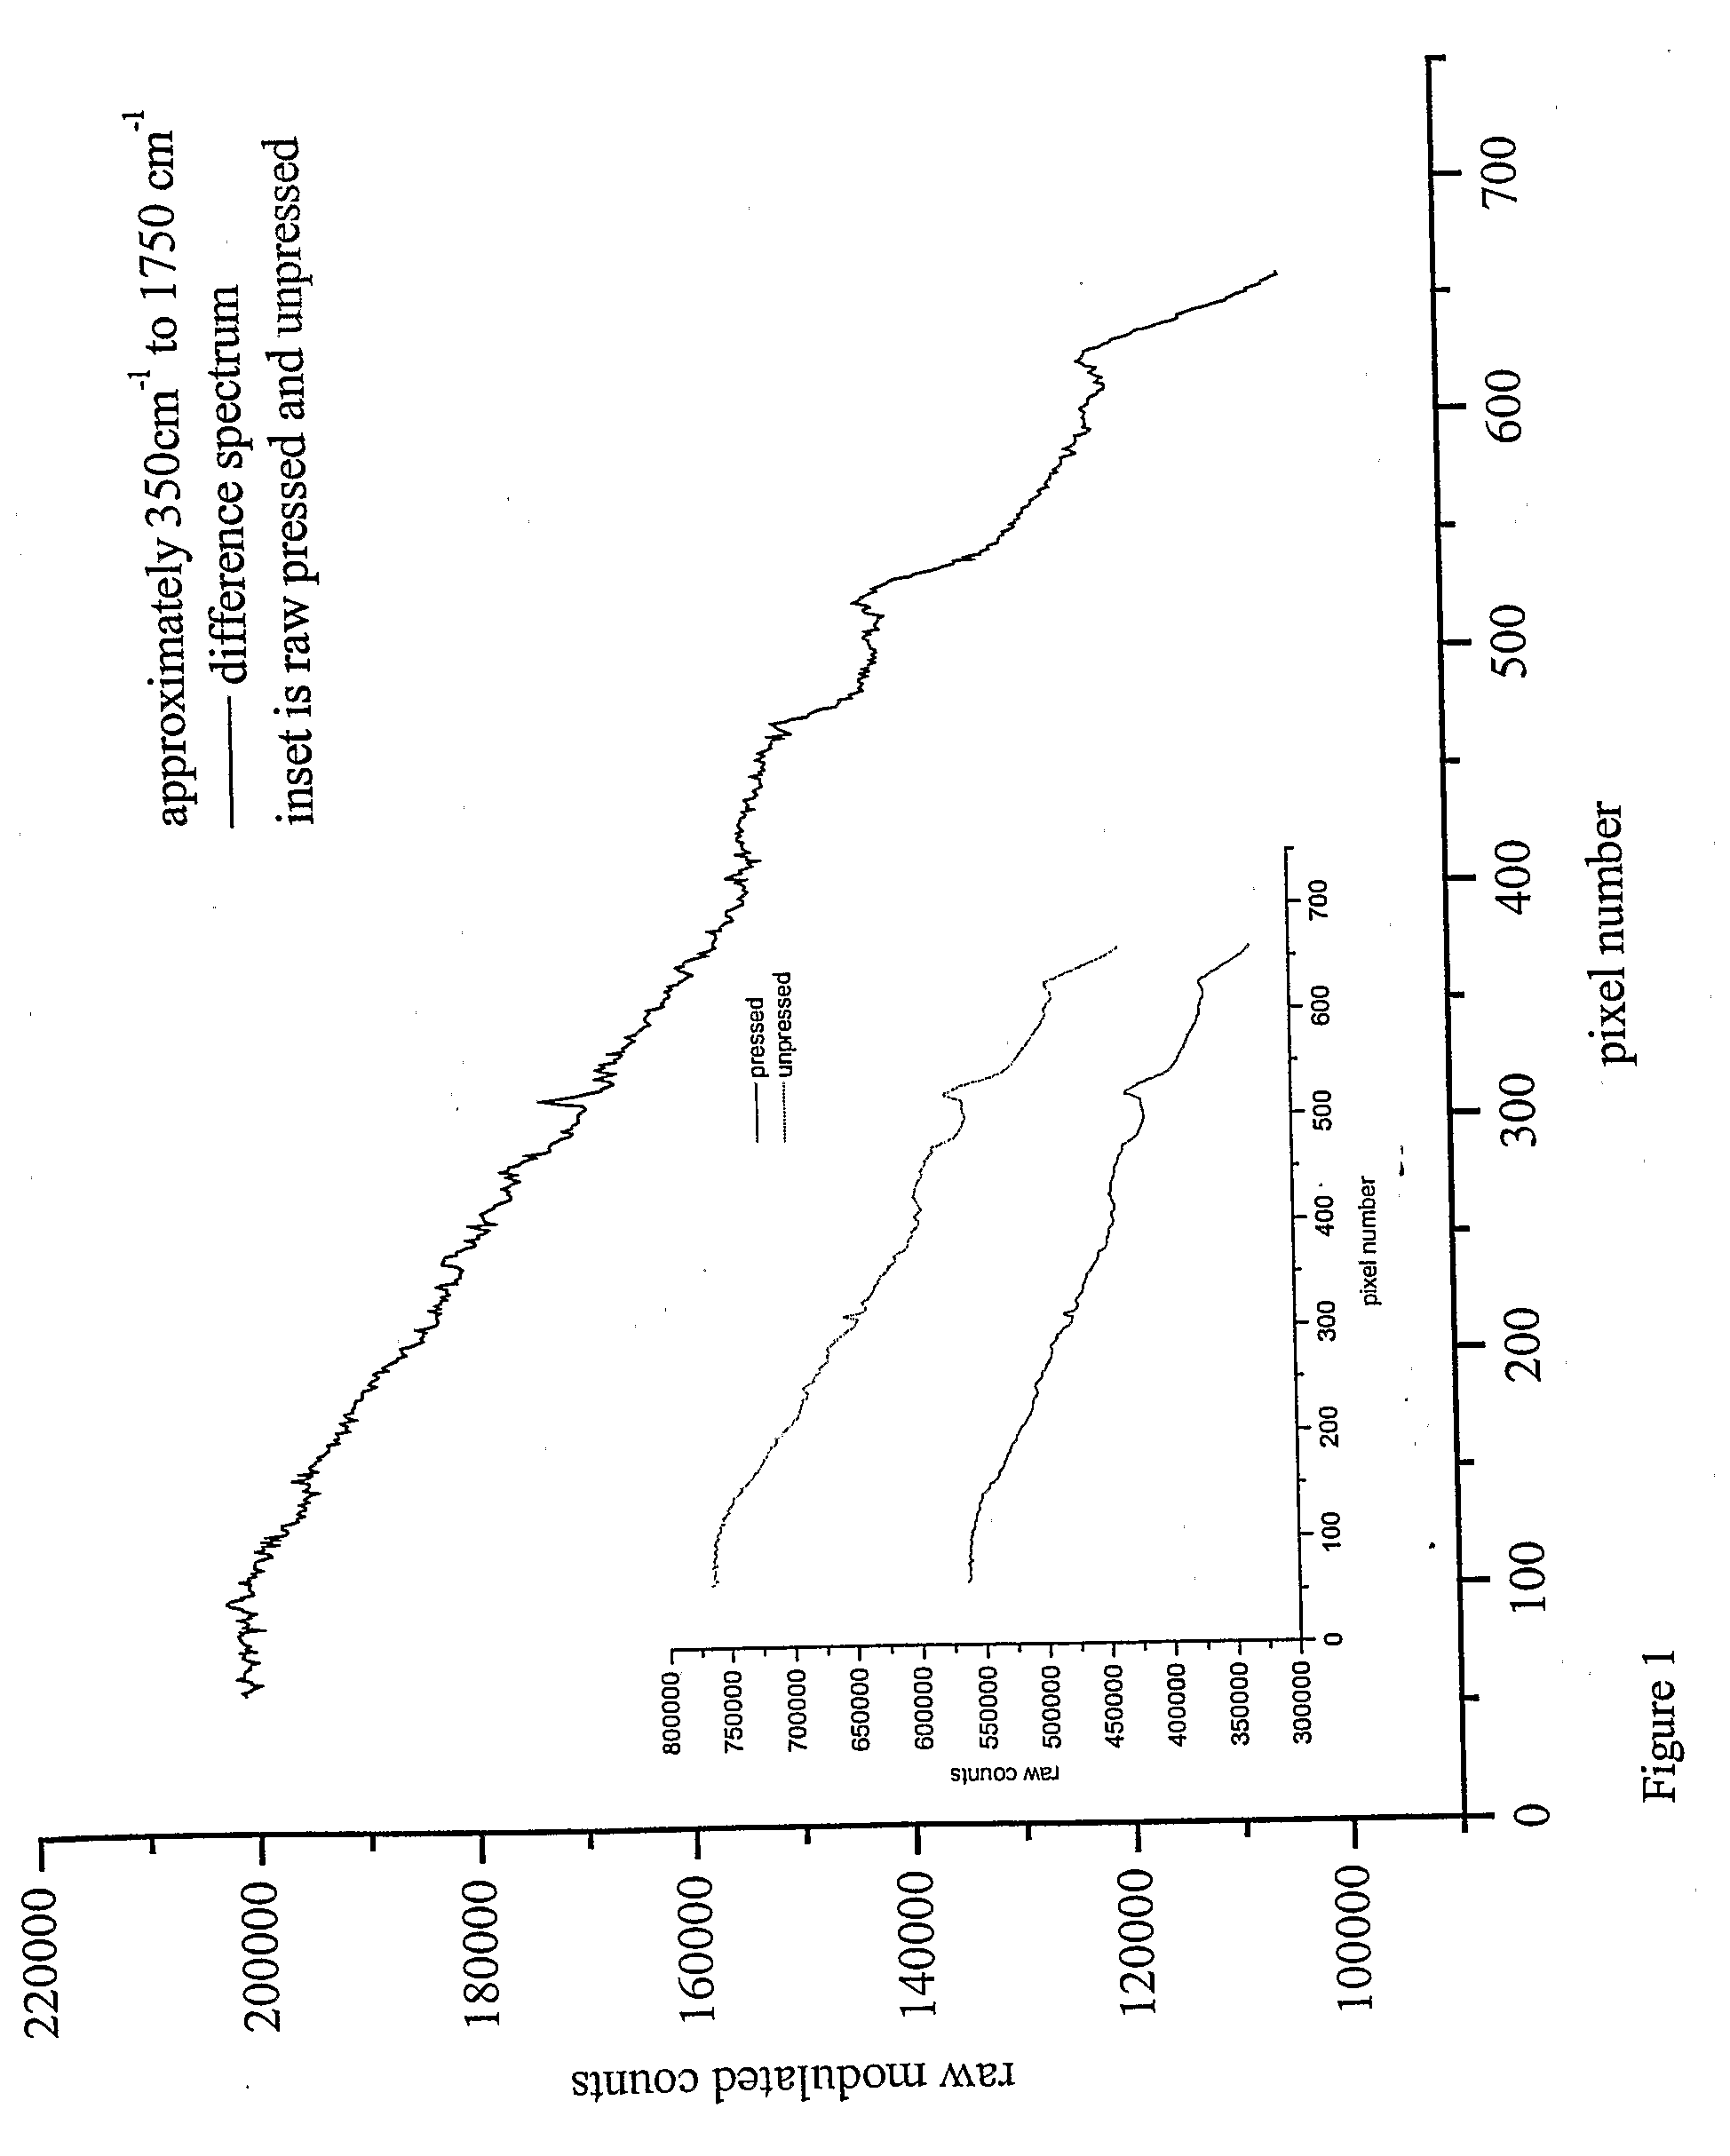 Specialized Human Servo Device And Process For Tissue Modulation Of Human Fingerprints